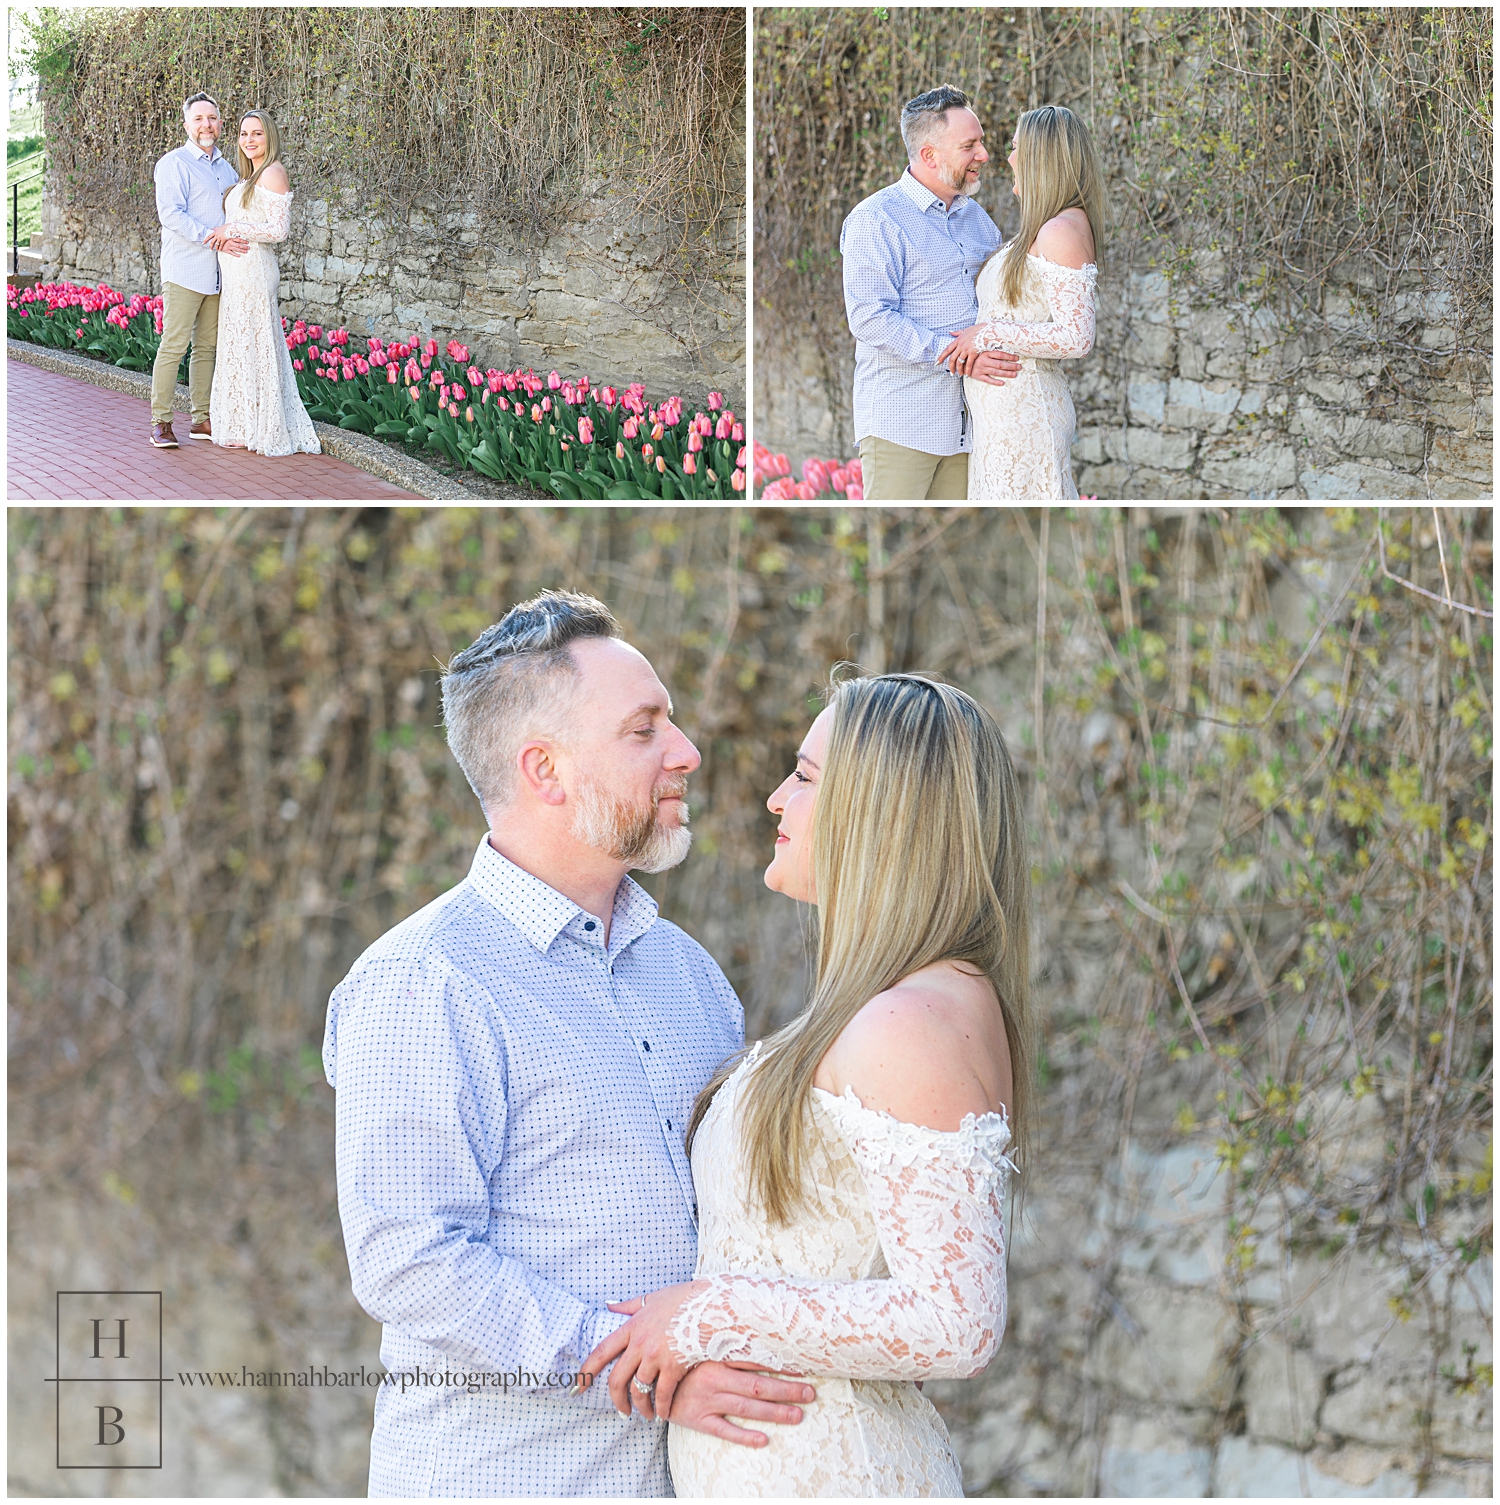 Lady in white dress and fiancé in blue shirt embrace by pink tulip bed.